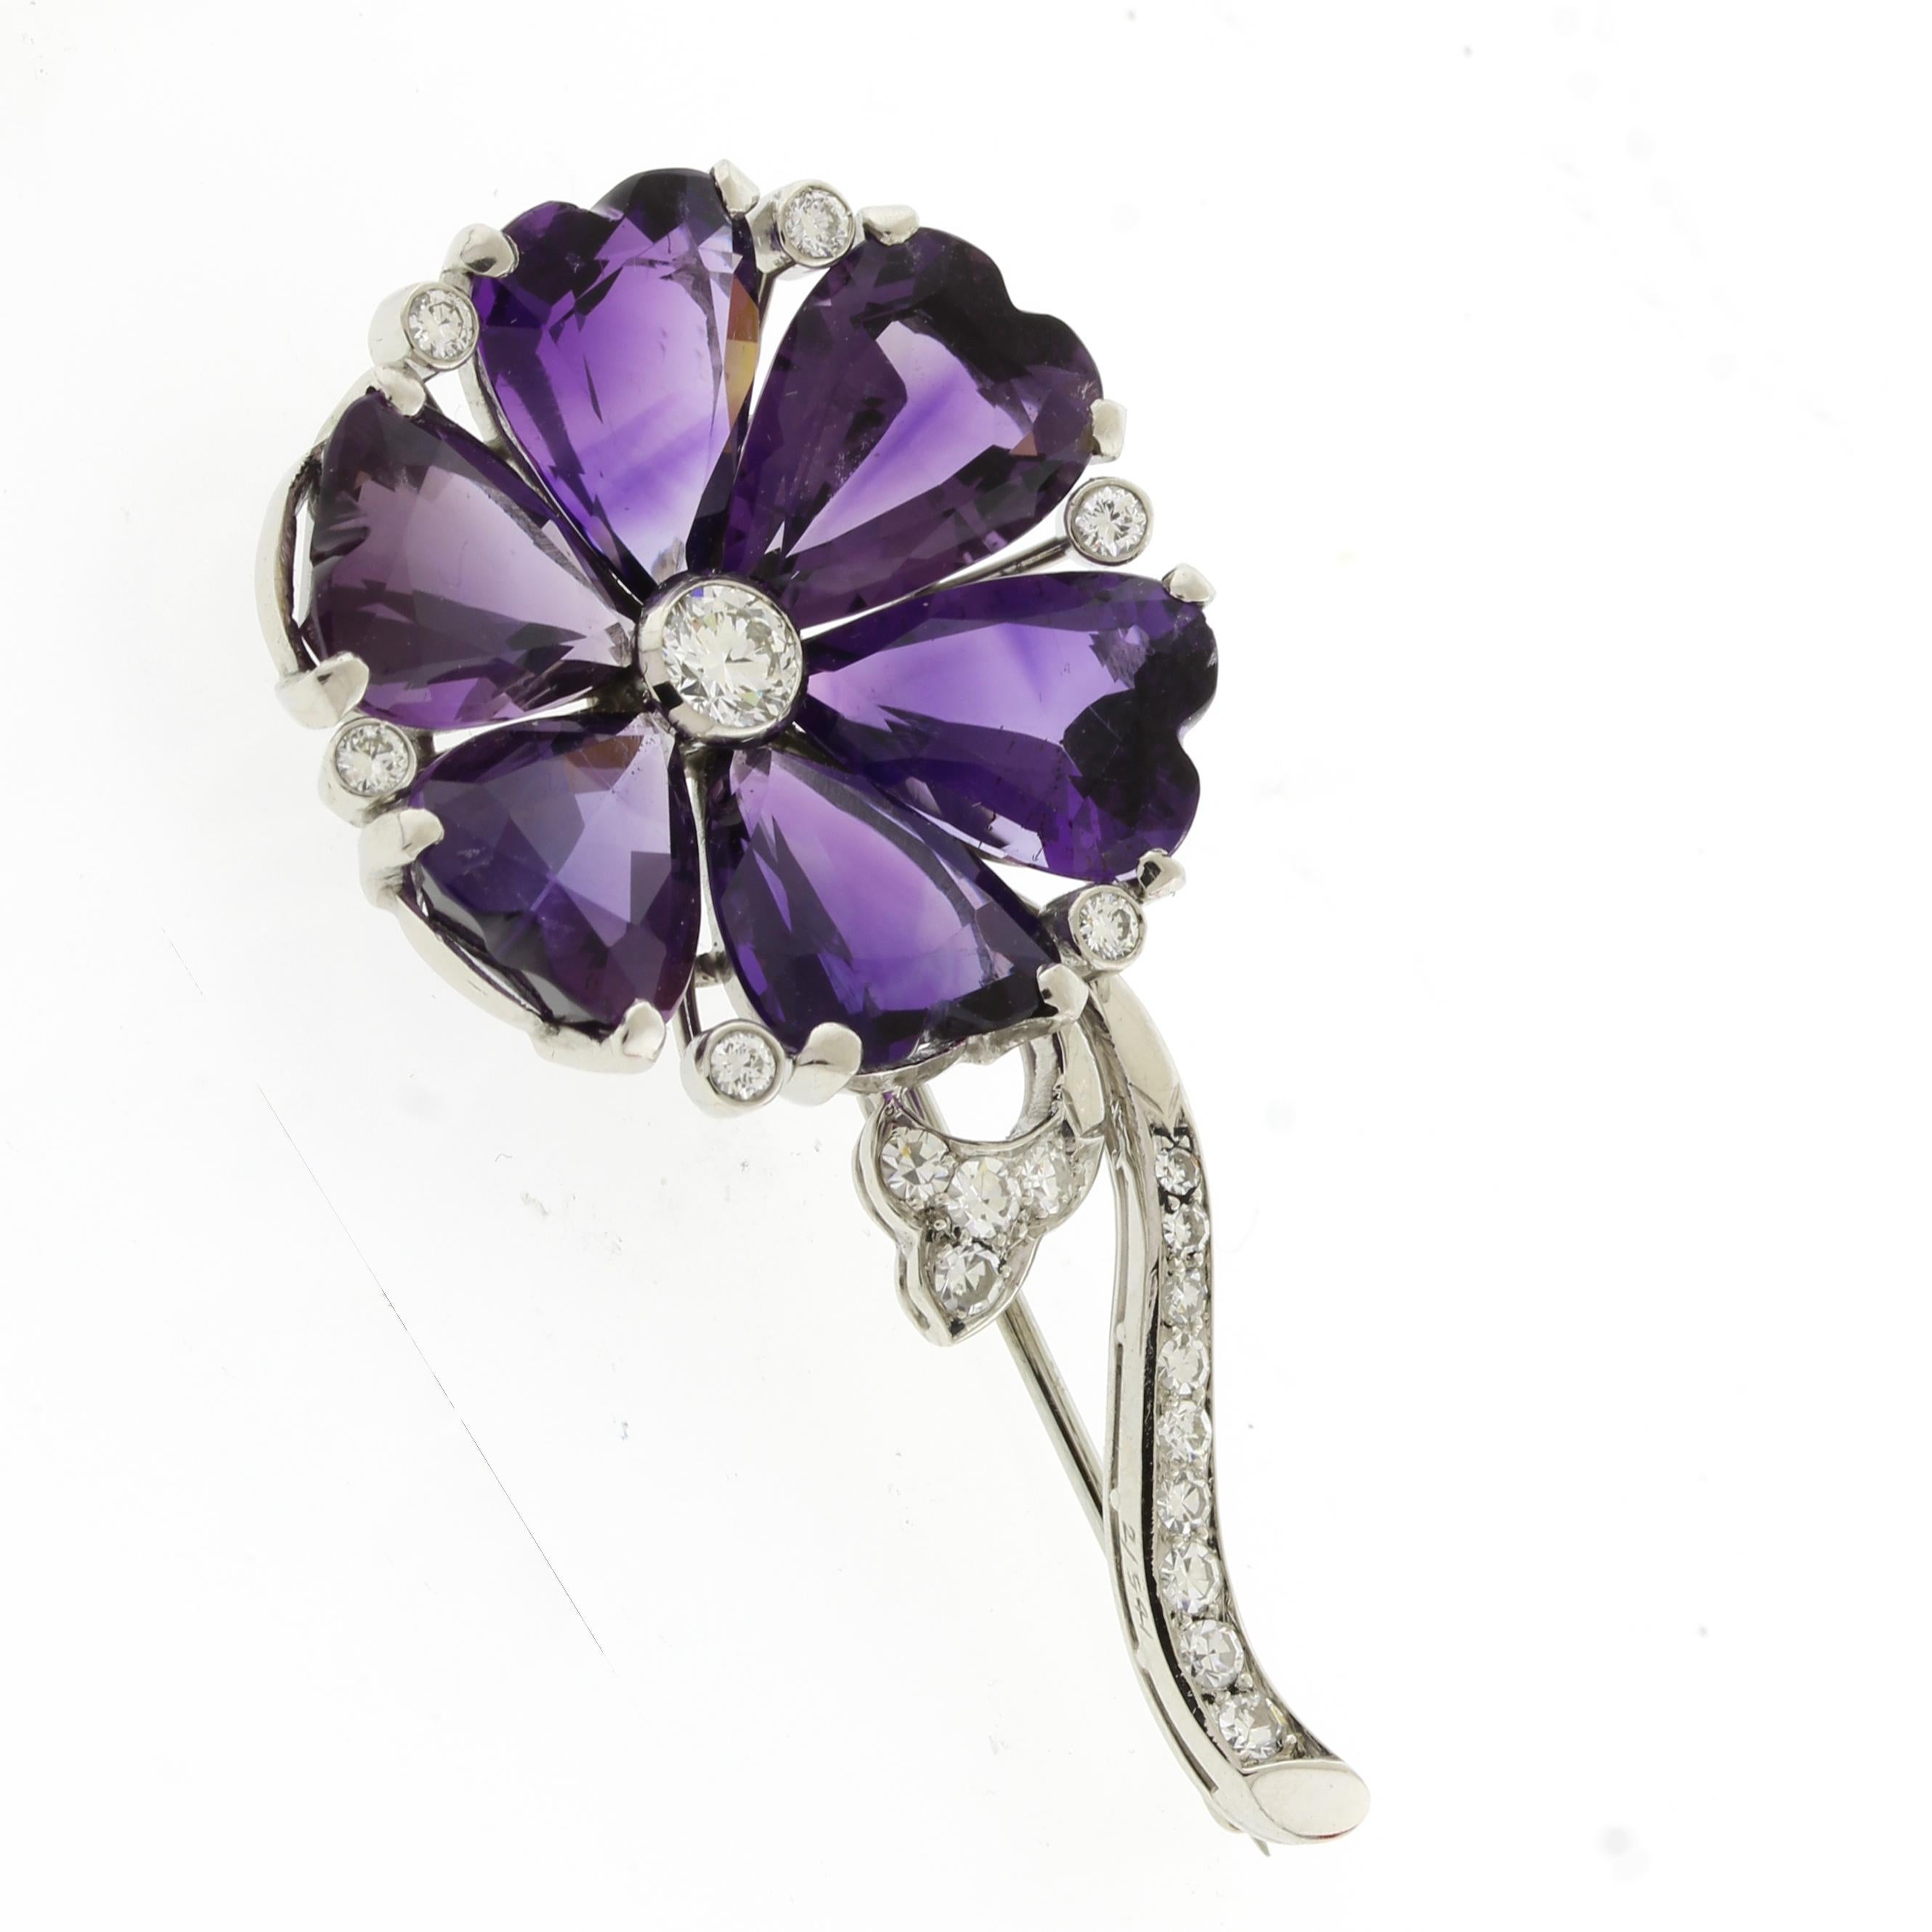 From the Mid-Century, a flower brooch with 6 Amethyst heart shaped flower petals and a diamond stem.
• Metal: Platinum	
• Circa: Mid-Century
•Gemstone: 6 Amethysts stones
20Diamonds, 19D=.45carats and 1 center diamond=.35 carats
• Weight: 12.3